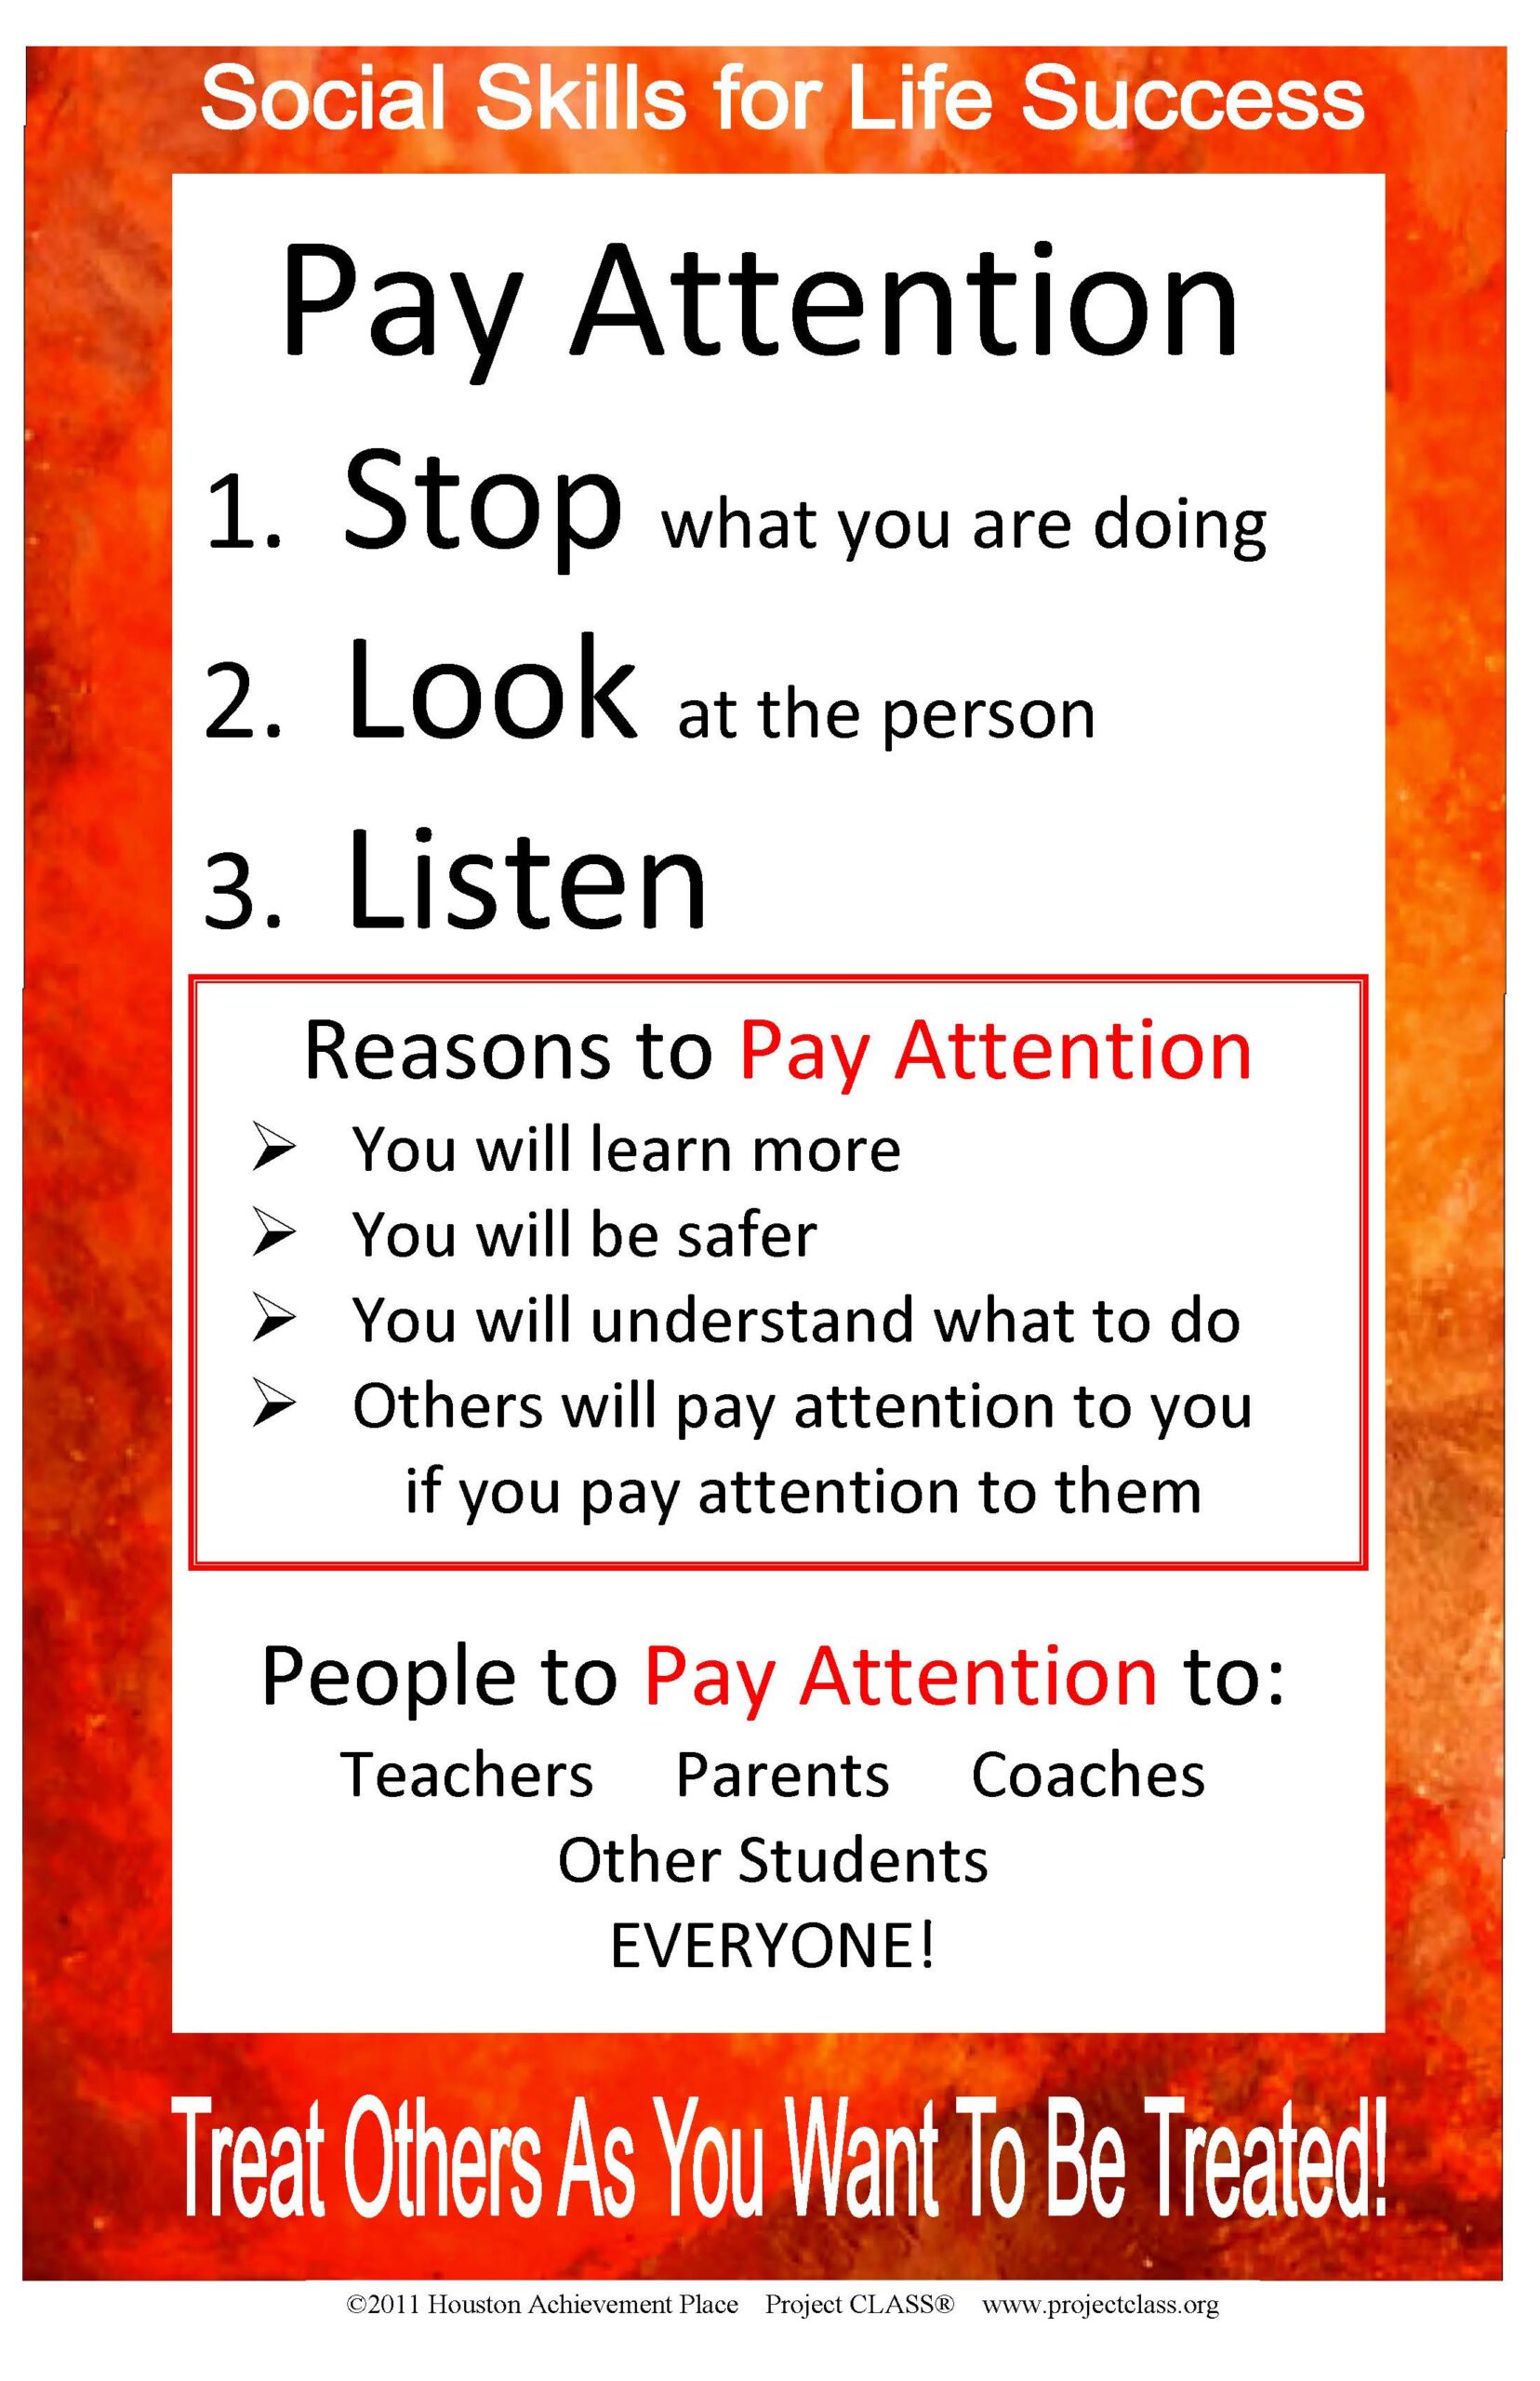 Pay Attention2011withReasons